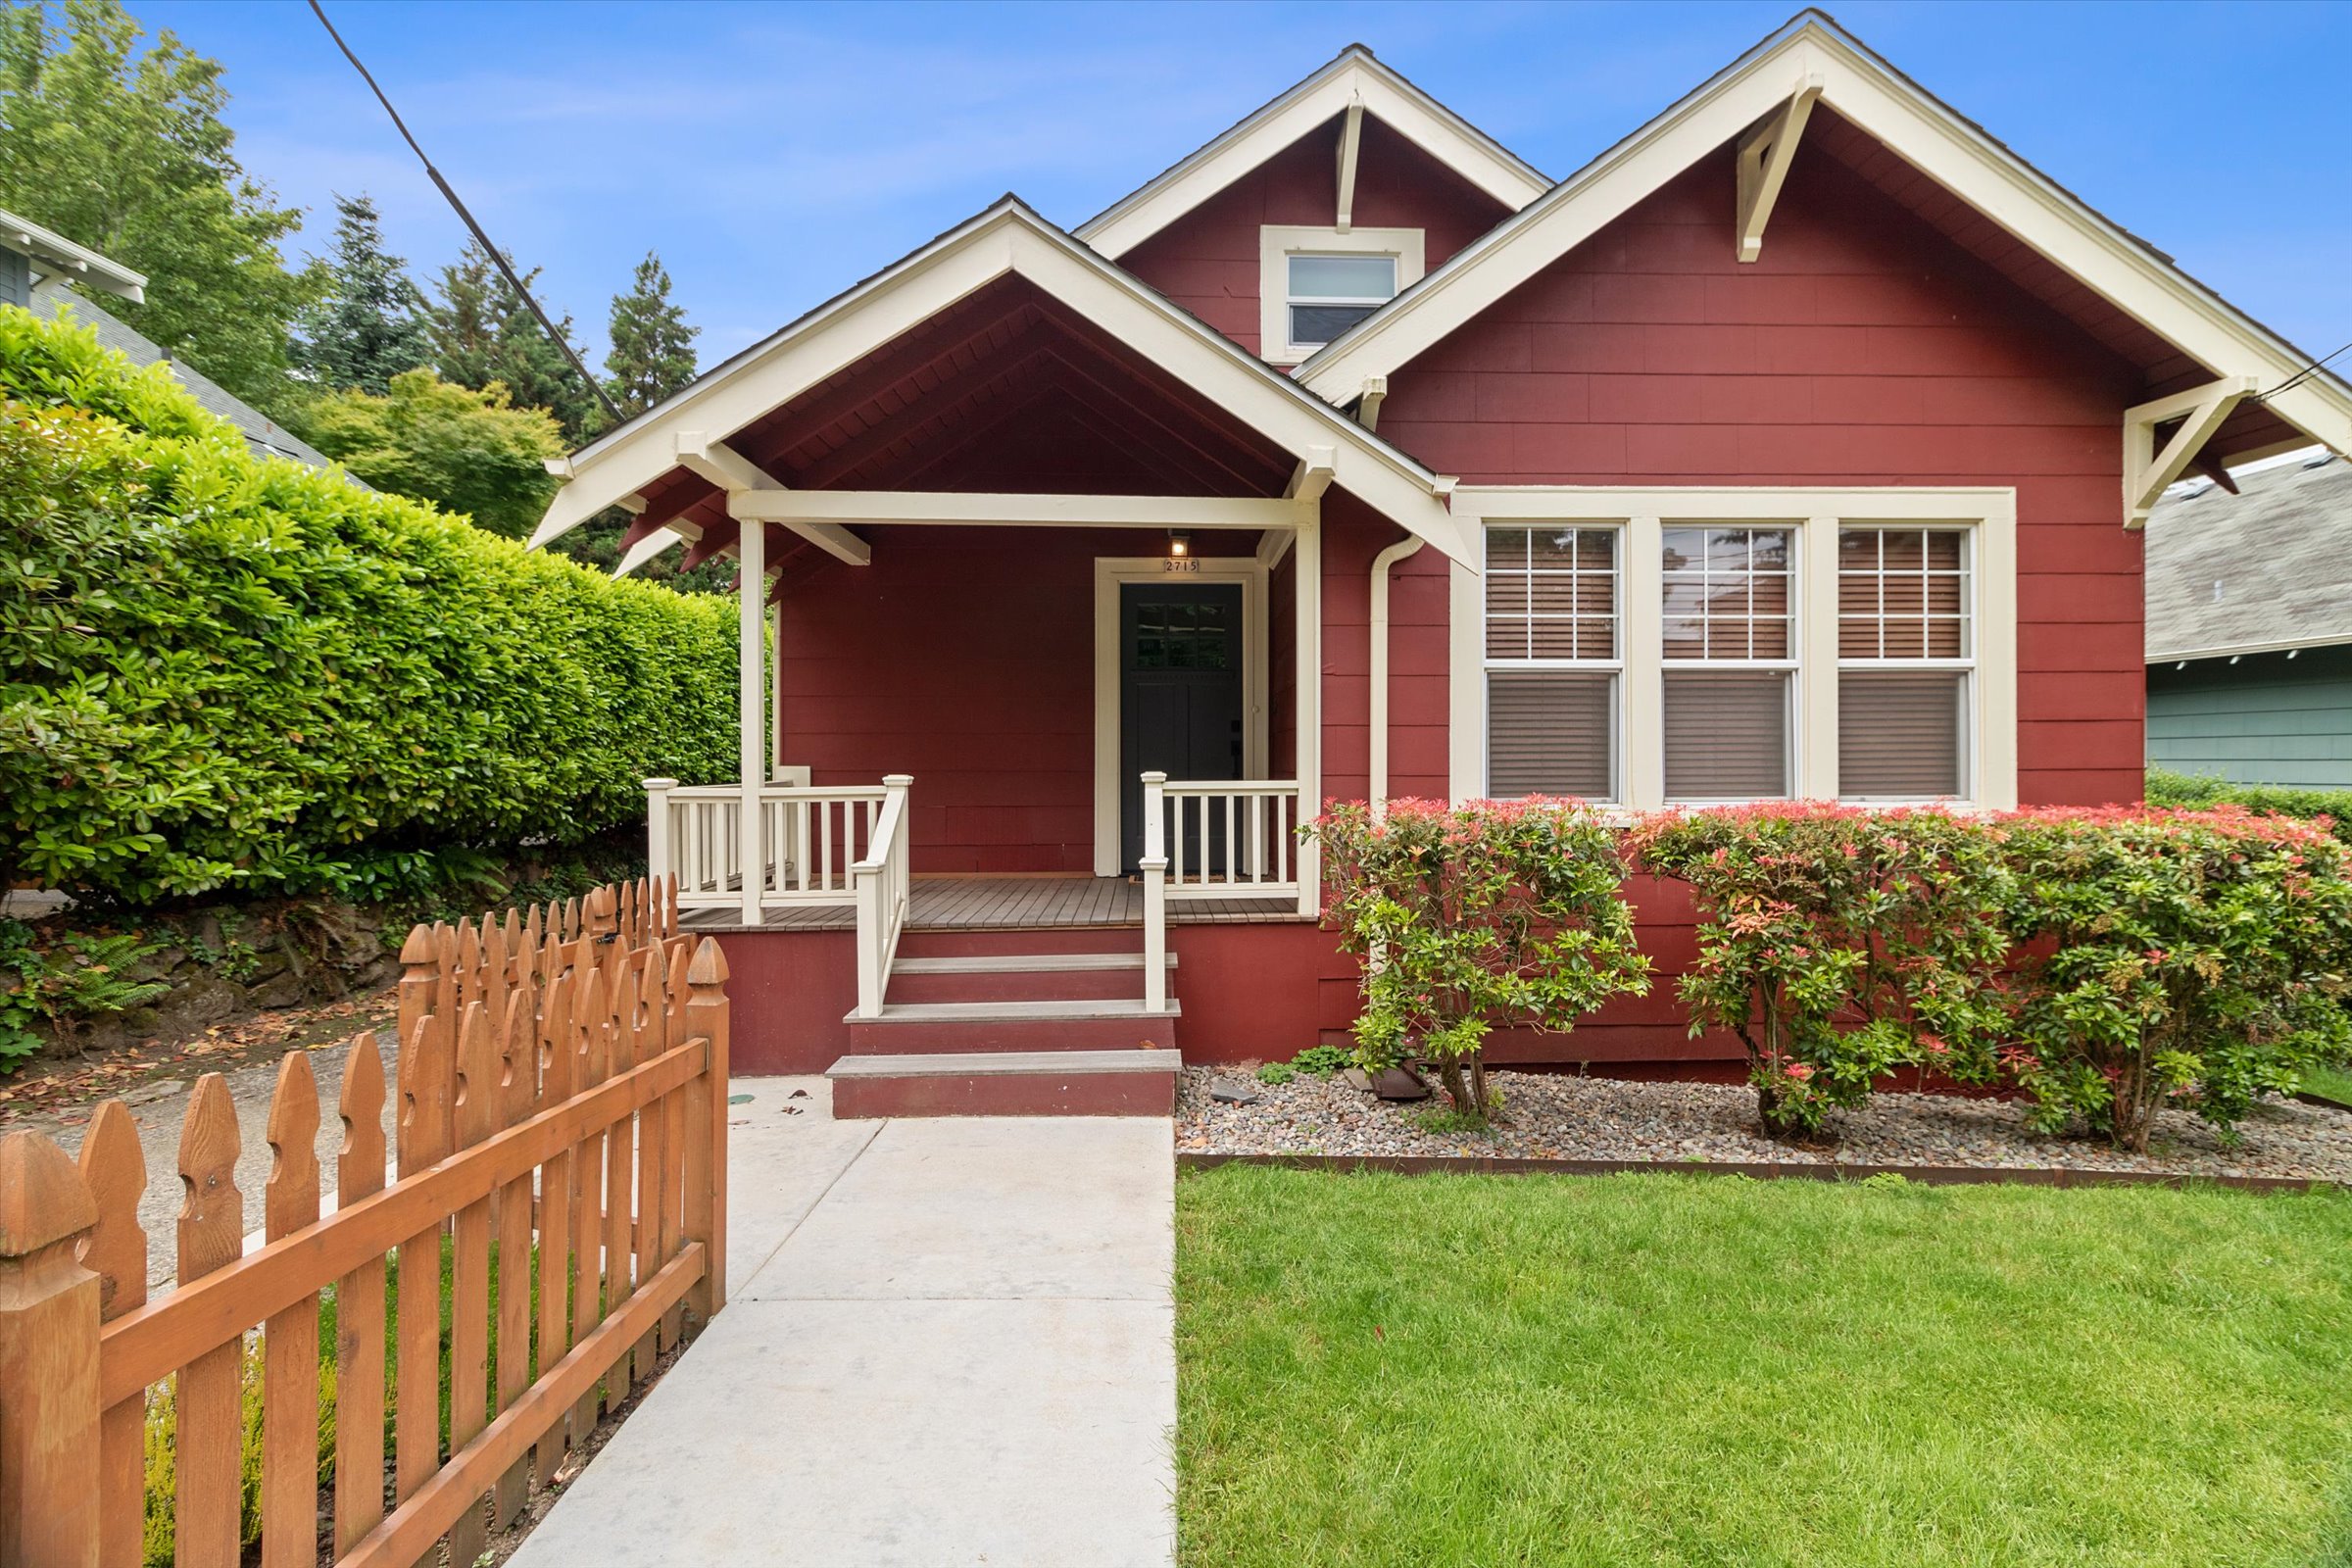 New Listing! 2715 SE 49th Ave, Portland Offered for $675,000